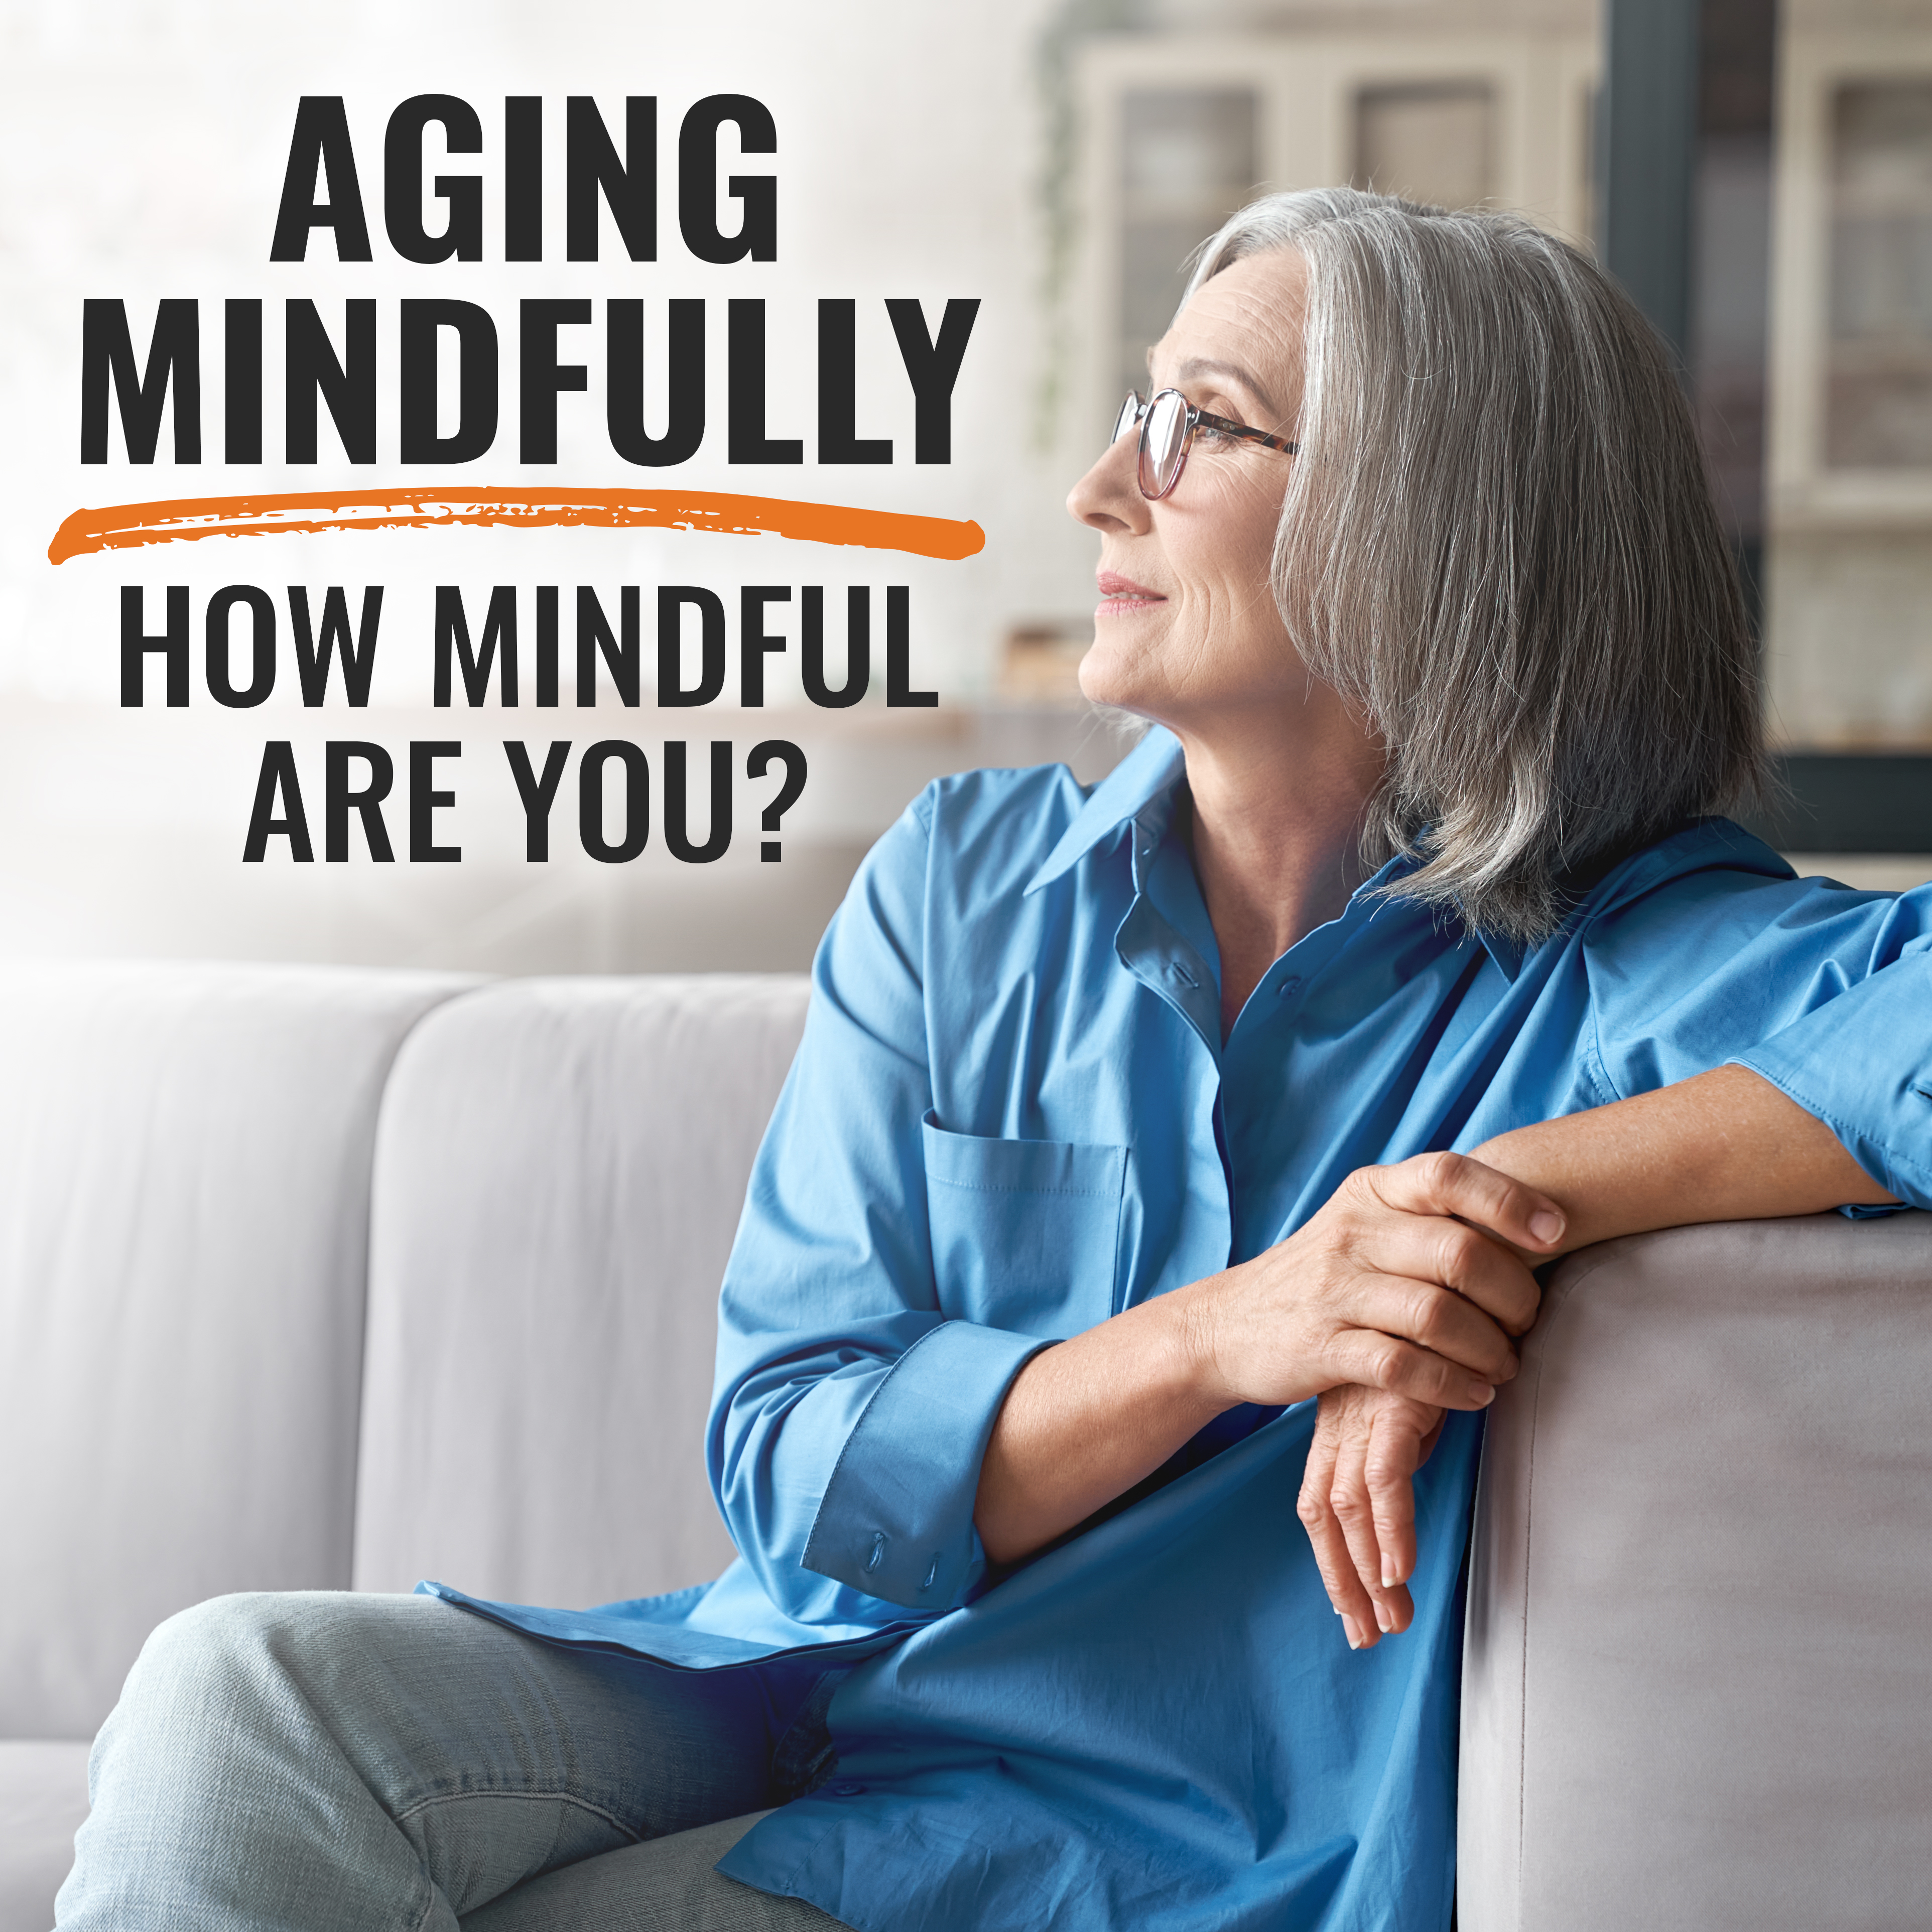 Aging Mindfully: How Mindful Are You?